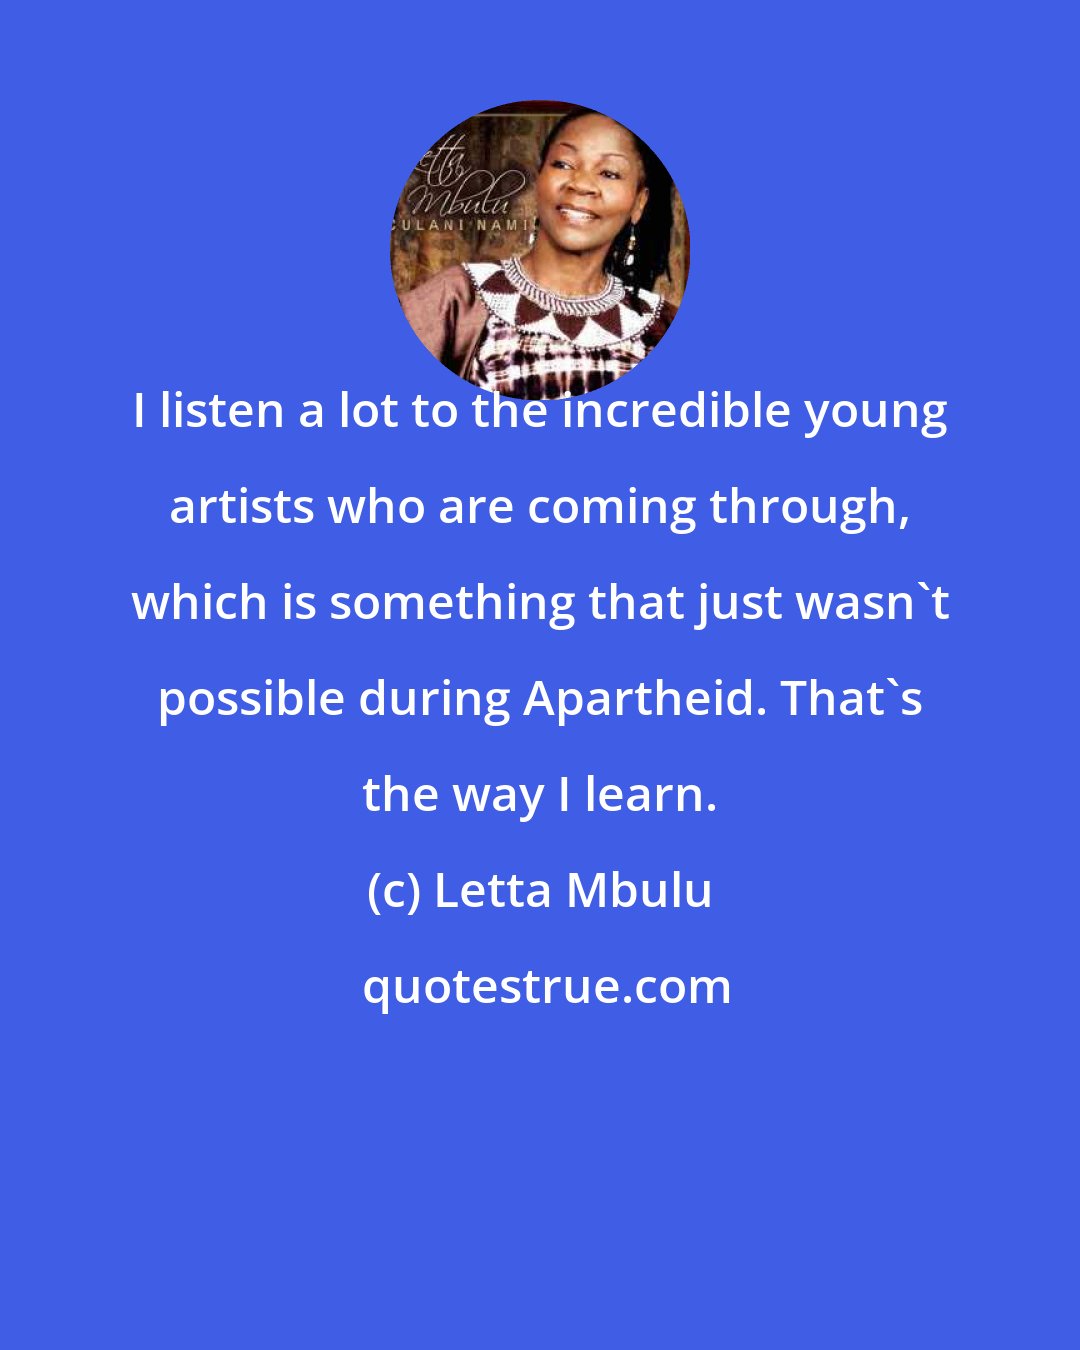 Letta Mbulu: I listen a lot to the incredible young artists who are coming through, which is something that just wasn't possible during Apartheid. That's the way I learn.